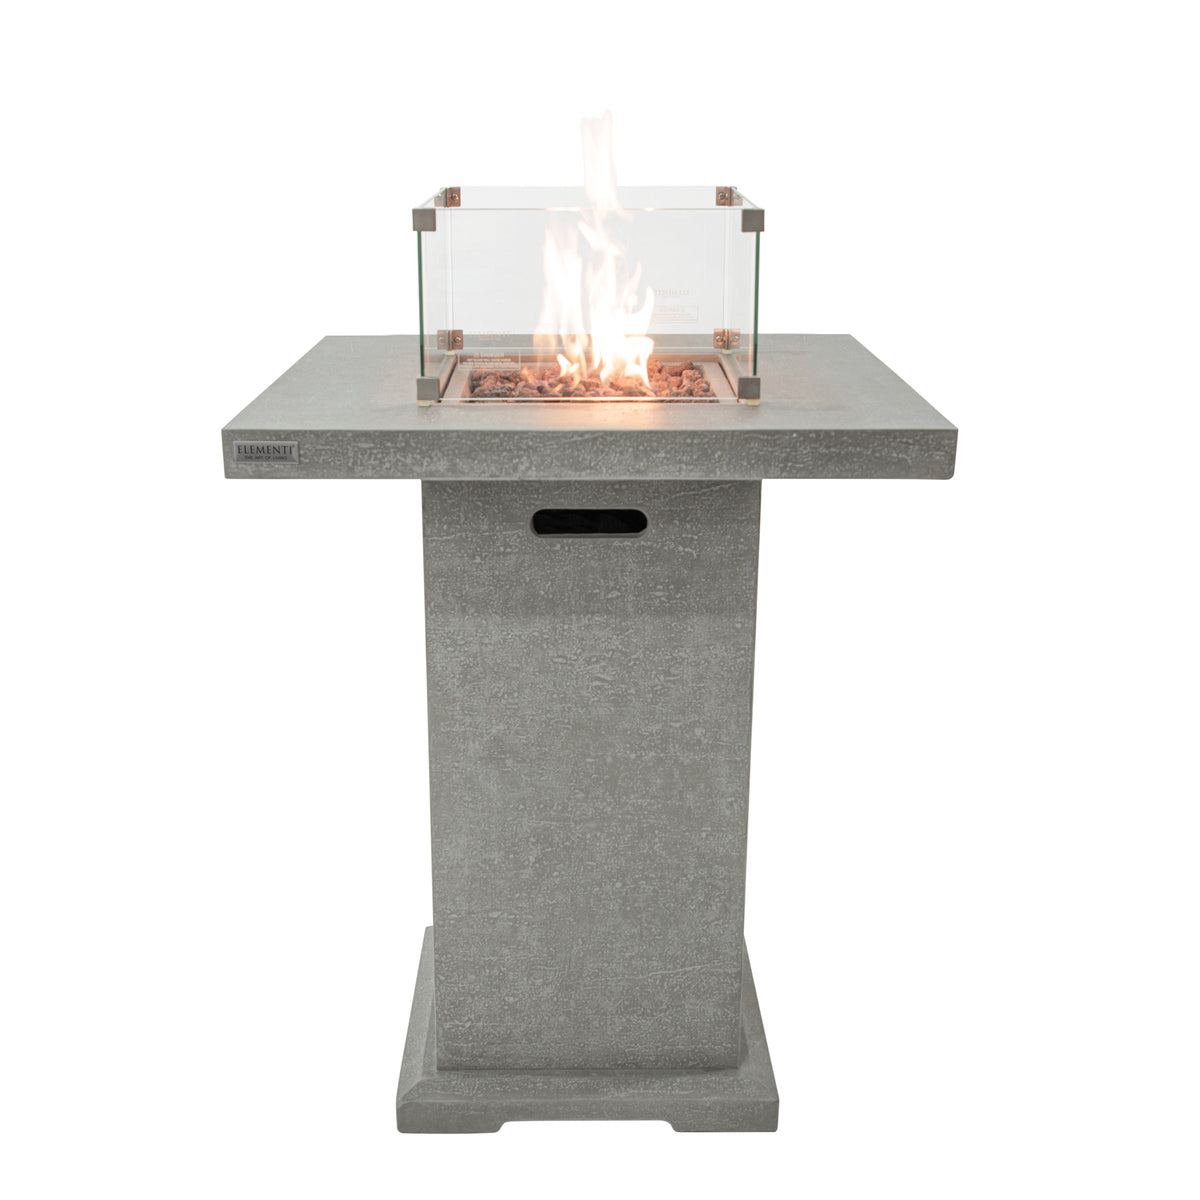 Elementi Montreal Bar Table in Light Gray lit with wind screen